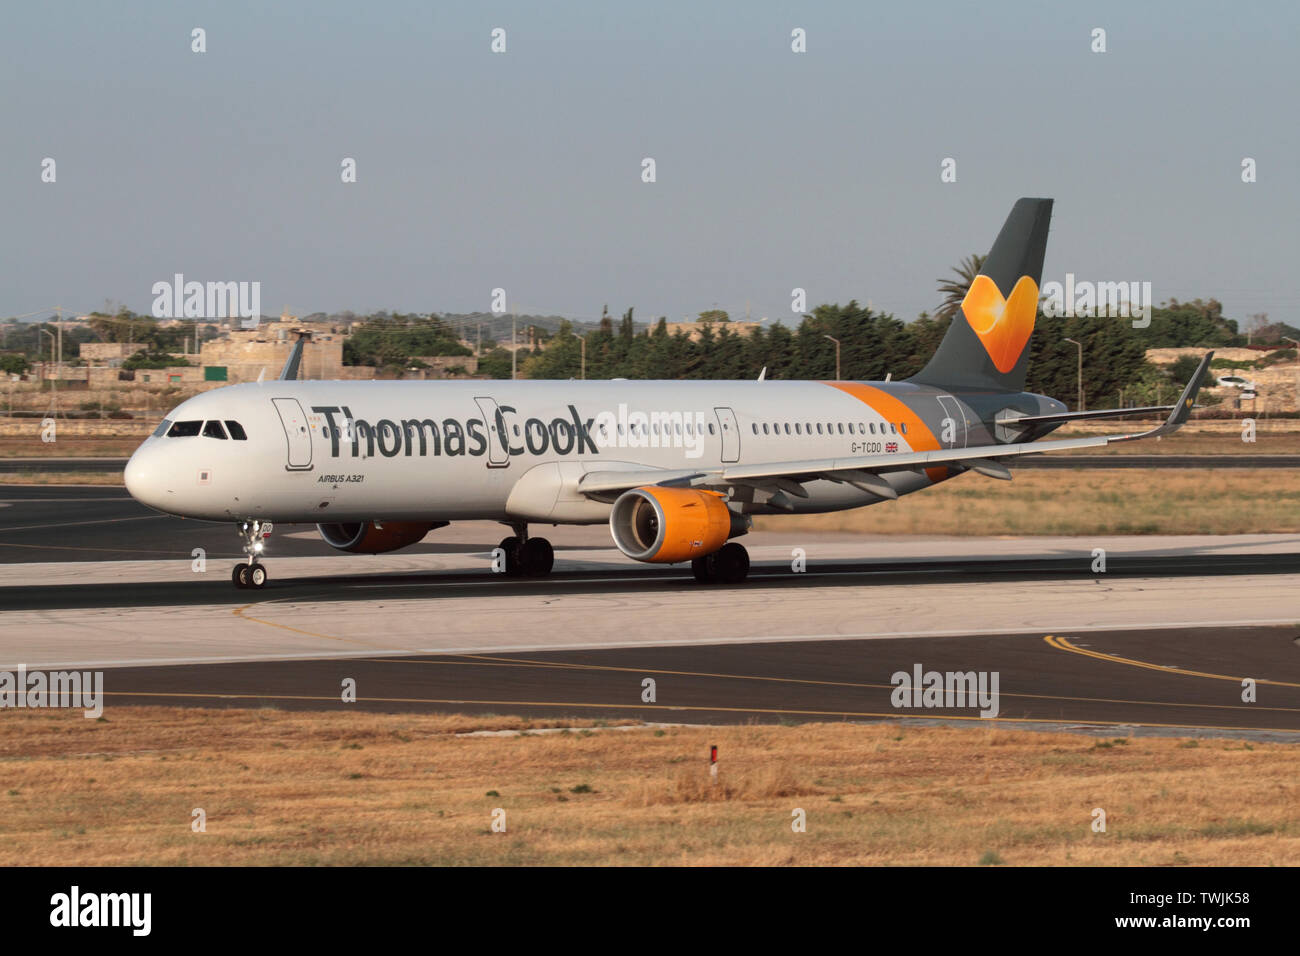 Thomas Cook Airlines Airbus A321 commercial passenger jet plane taking off from Malta. Civil aviation and air travel. Stock Photo